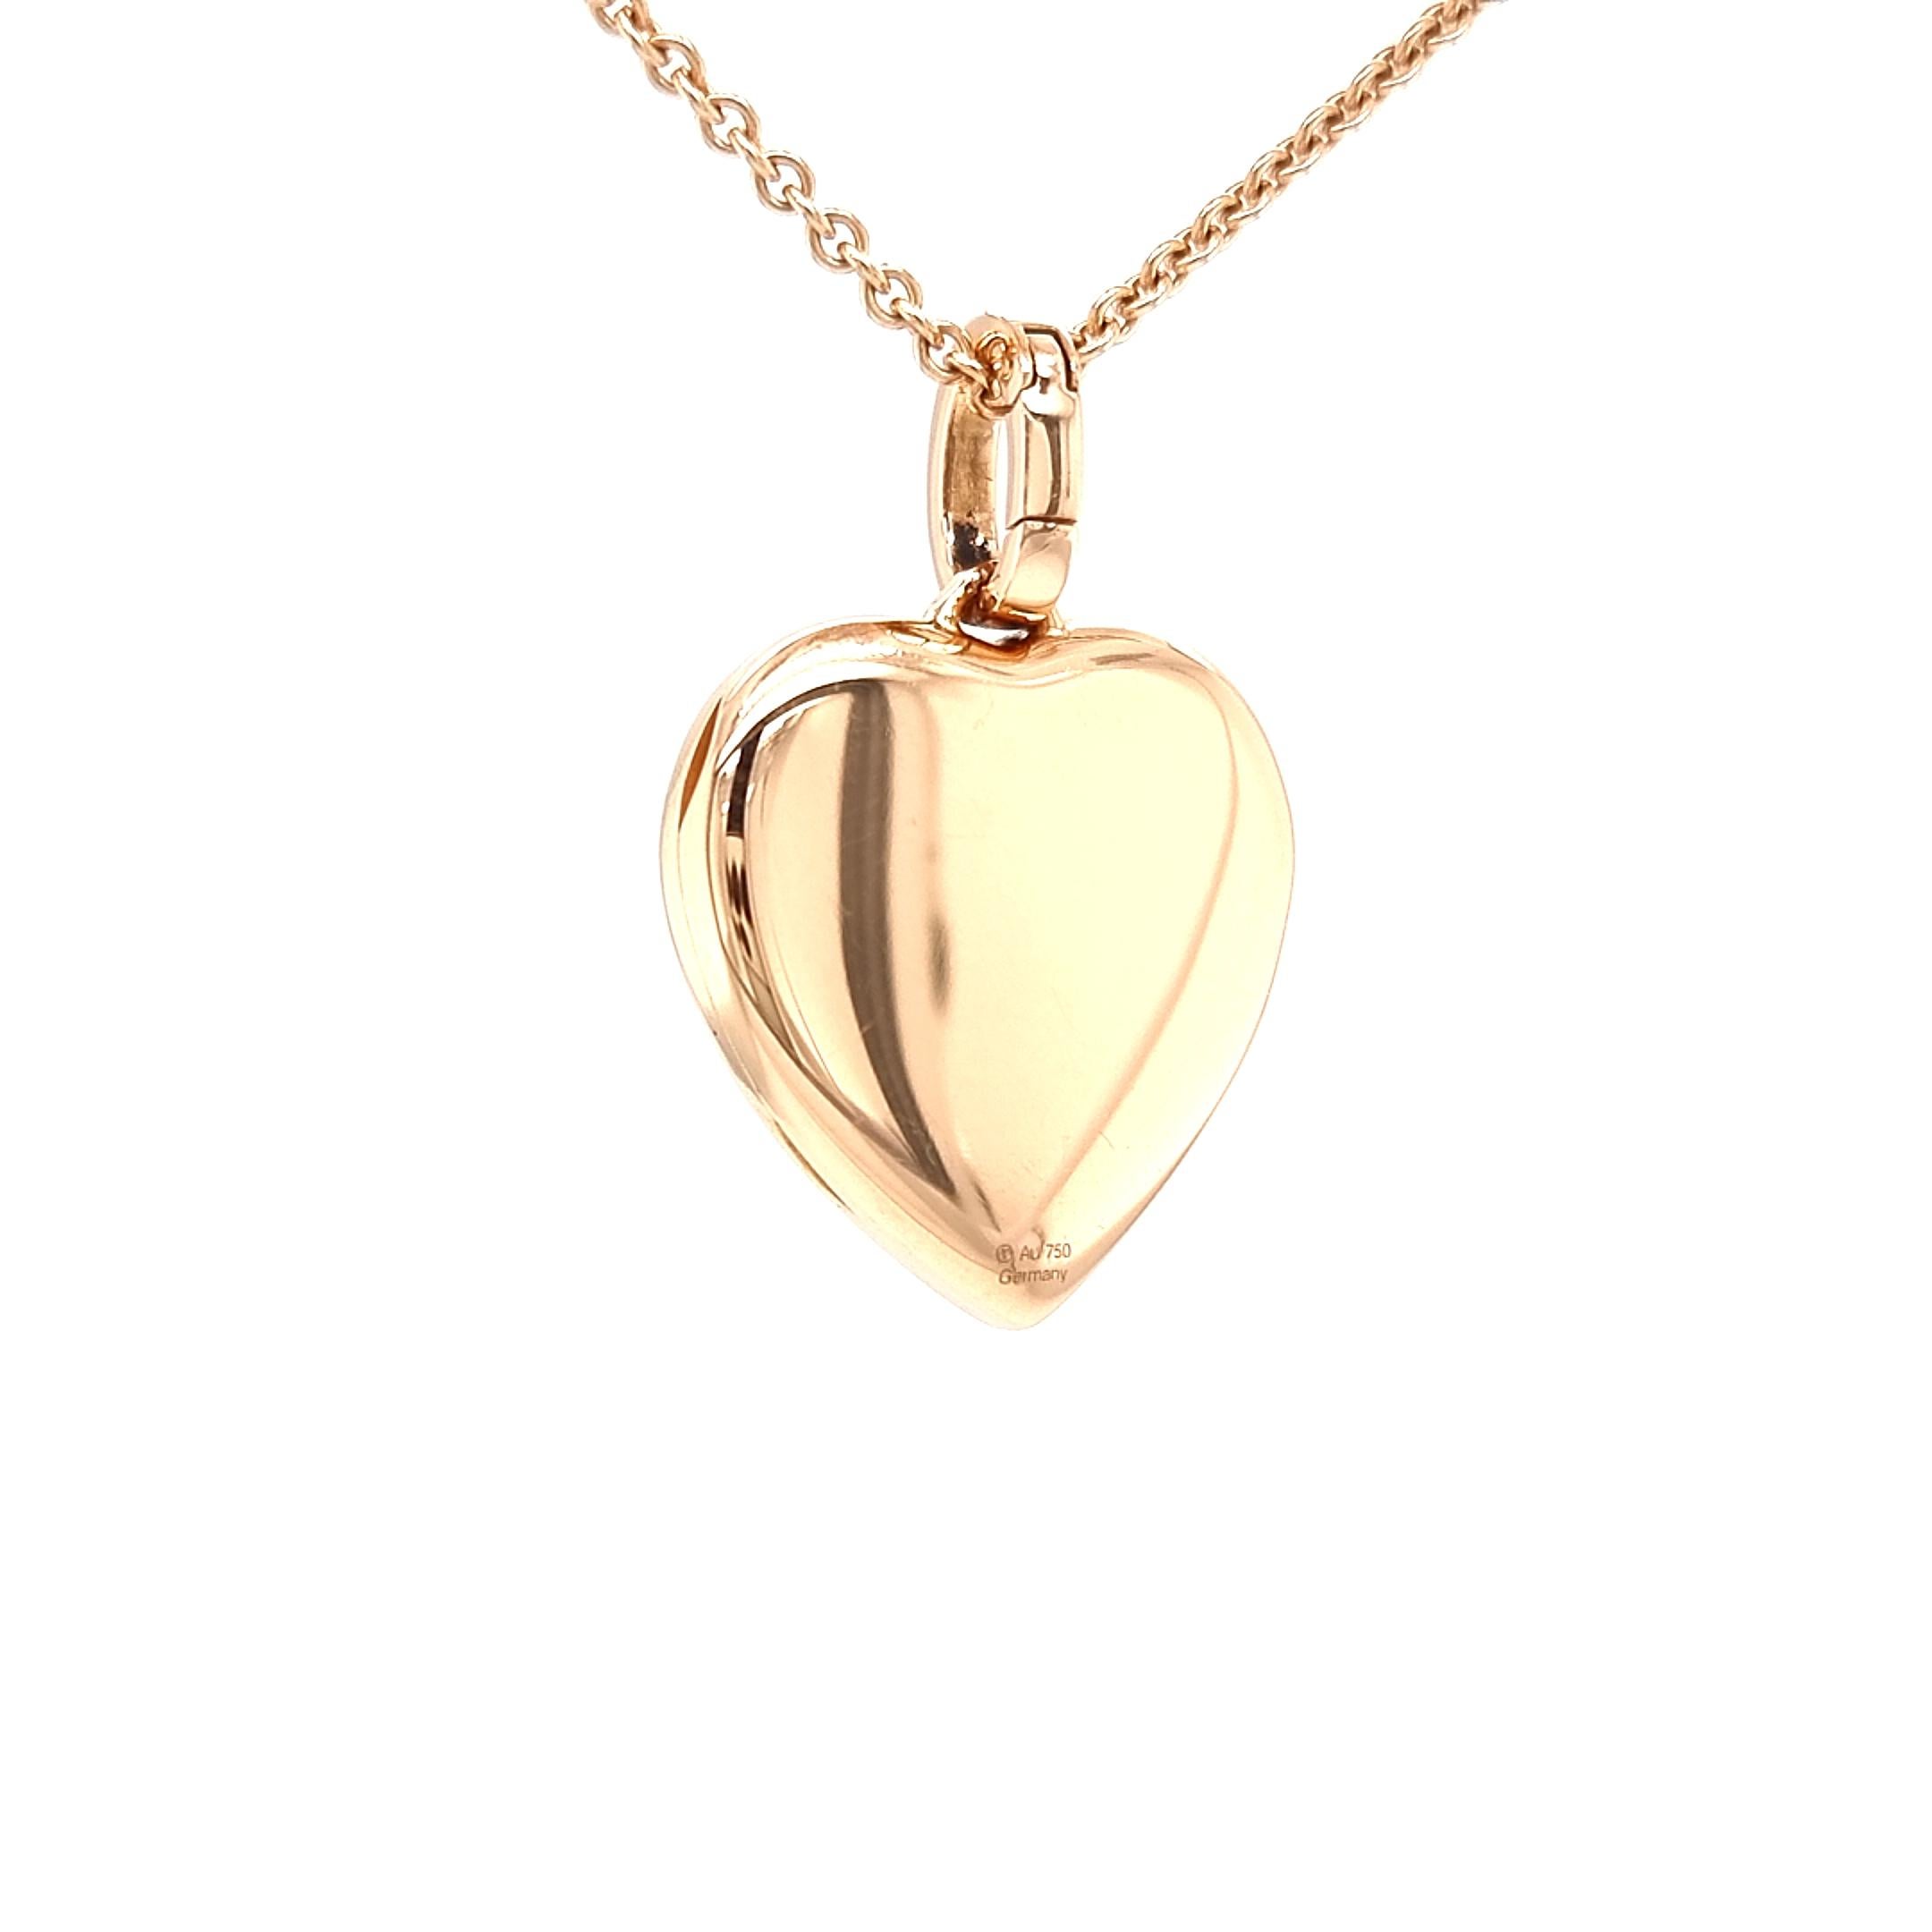 Brilliant Cut Heart Shaped Locket Pendant by Victor Mayer, 18k Rose Gold, 8 Diamonds 0.16ct For Sale